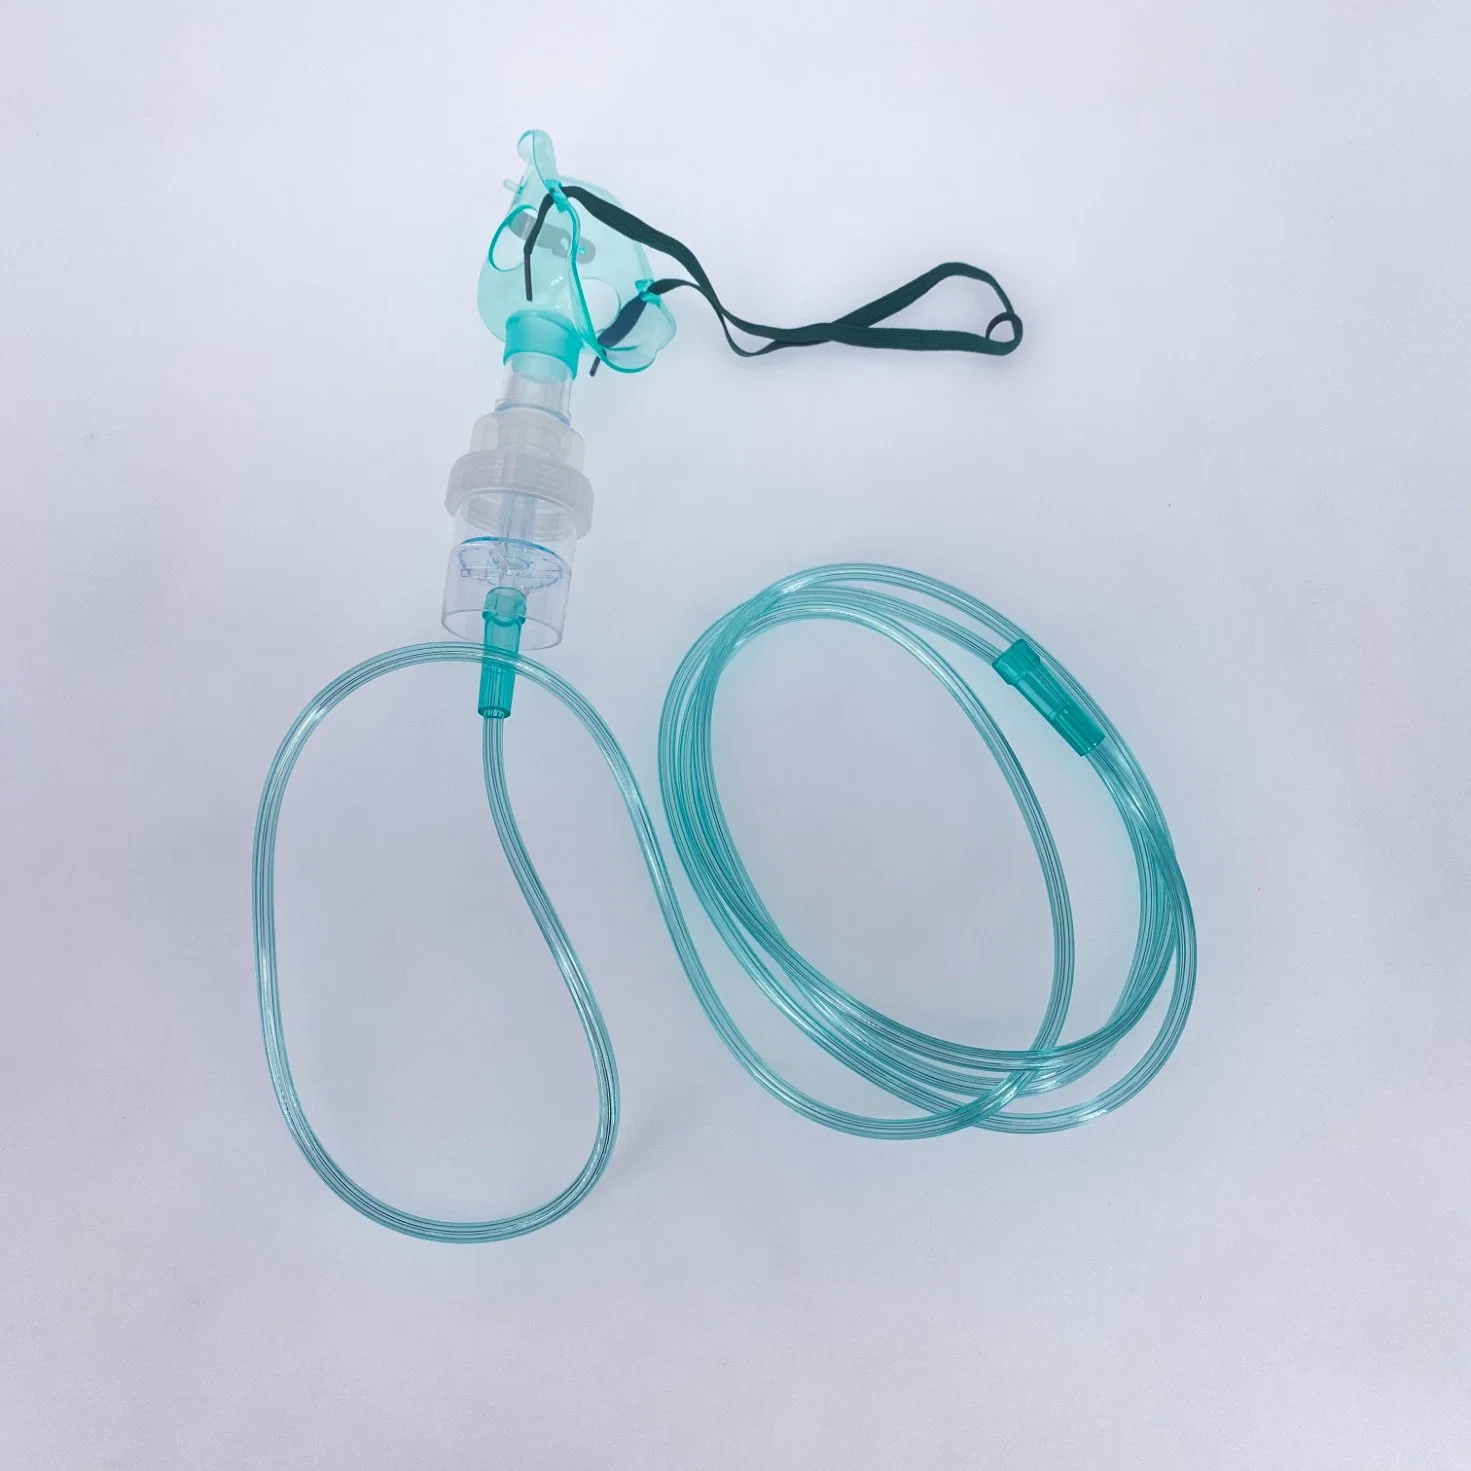 Wholesale Single Use Sterile Aerosol Oxygen Face Venturi Mask with Tube Nebulizer Breathing Mask in Disposable Medical Supplies